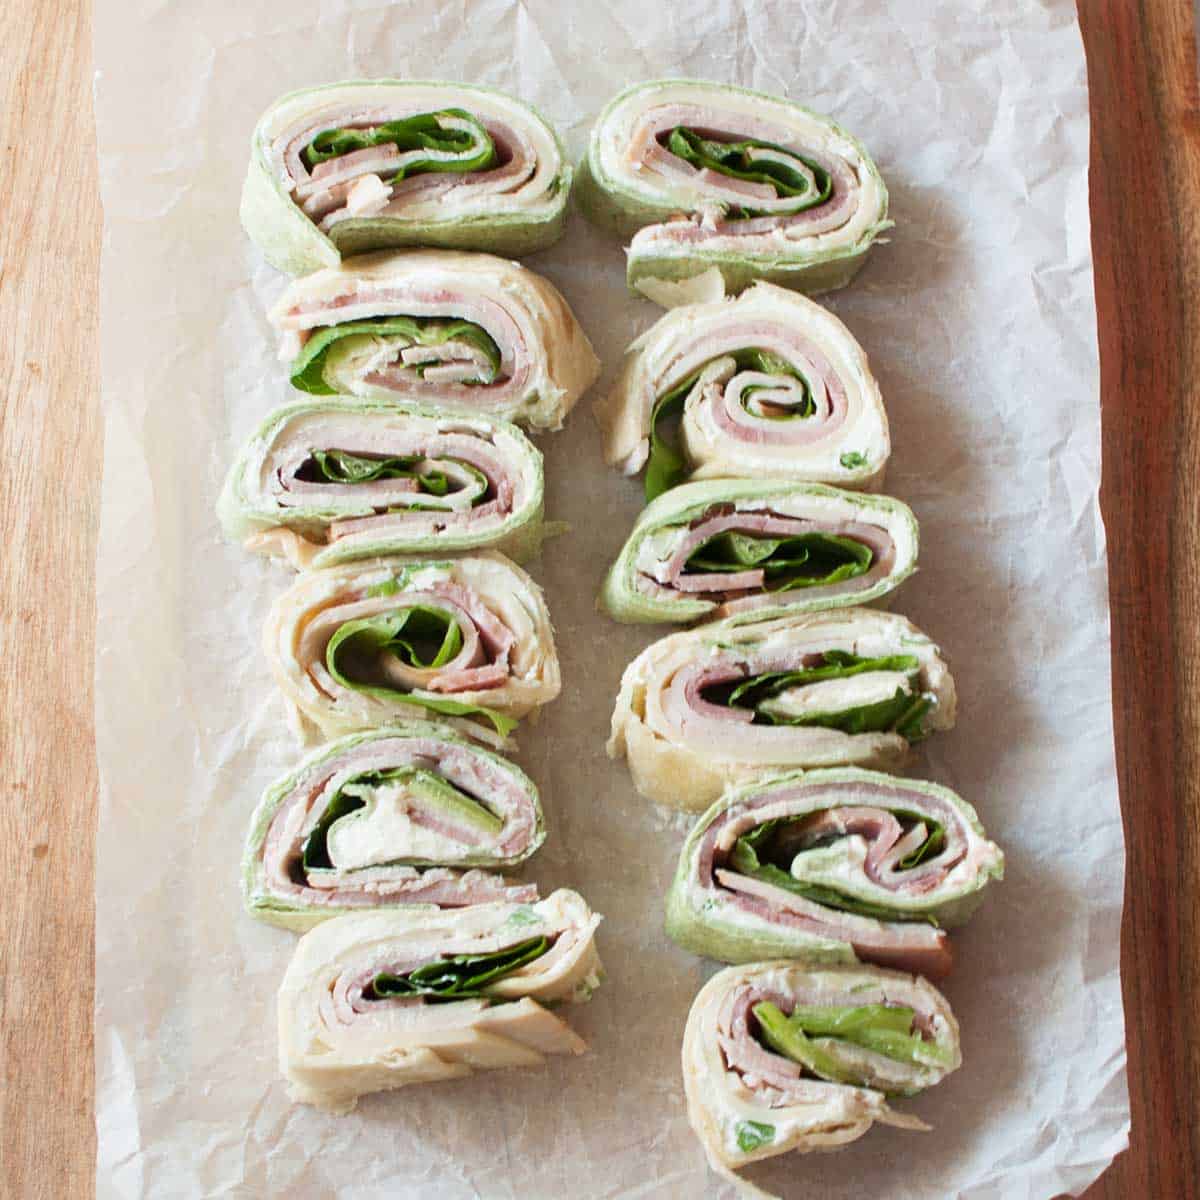 pin wheel sandwiches (sandwiches made from tortillas, lunch meat, cream cheese mixture, and lettuce) on a wooden tray